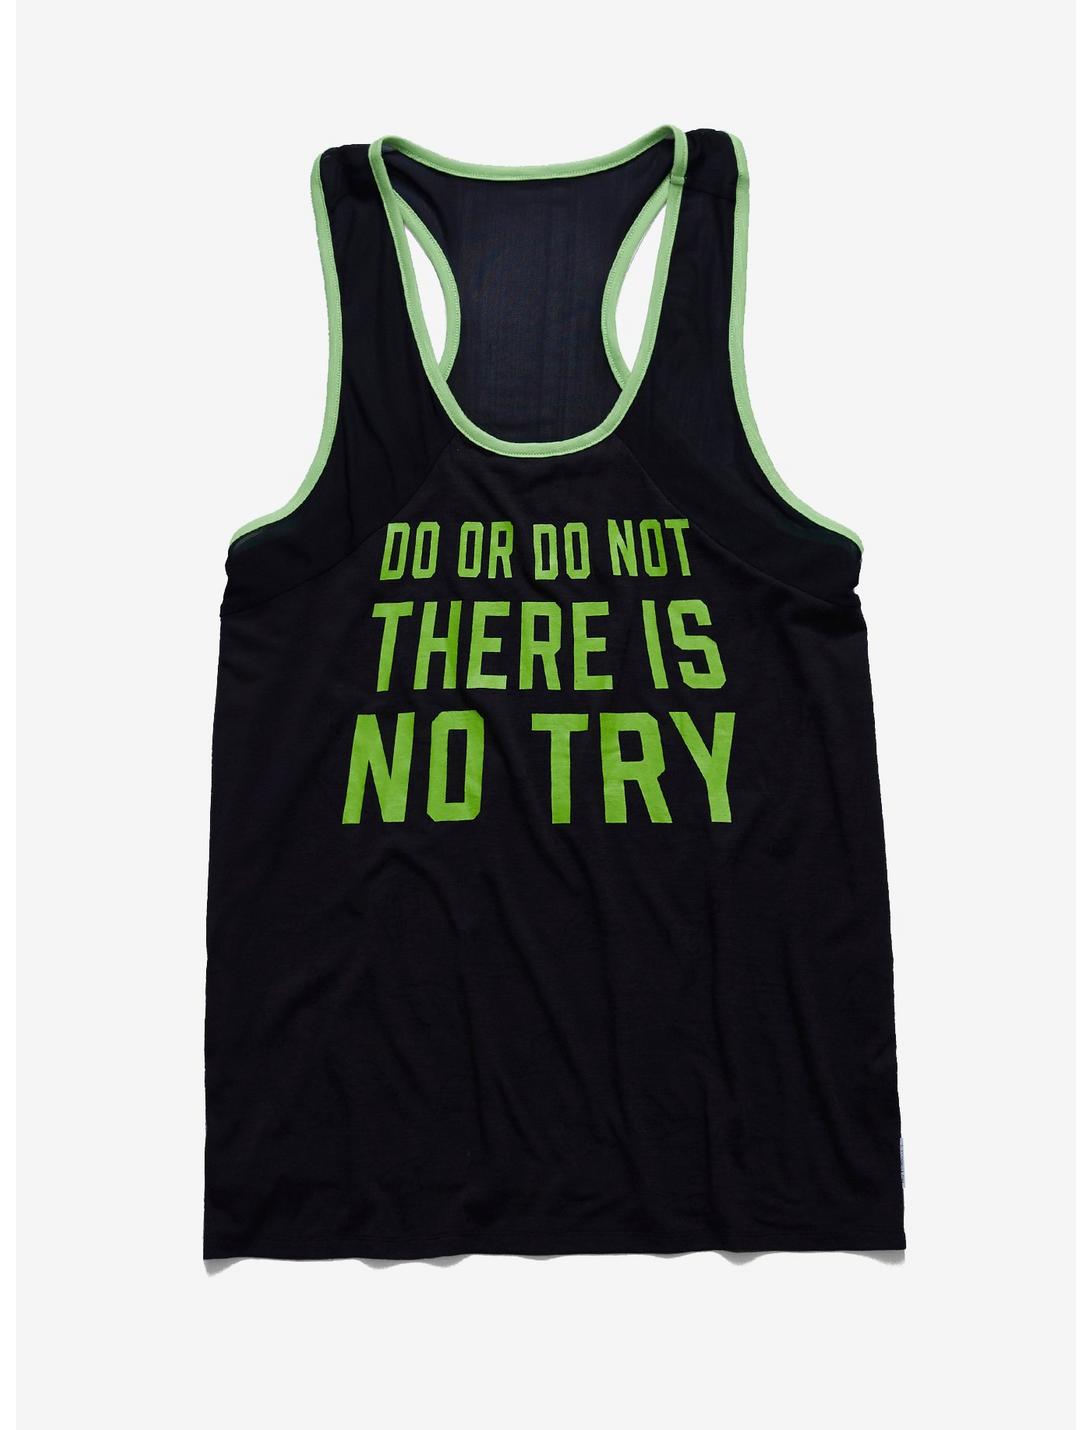 Her Universe Star Wars: The Clone Wars Yoda Quote Racerback Tank Top, MULTI, hi-res